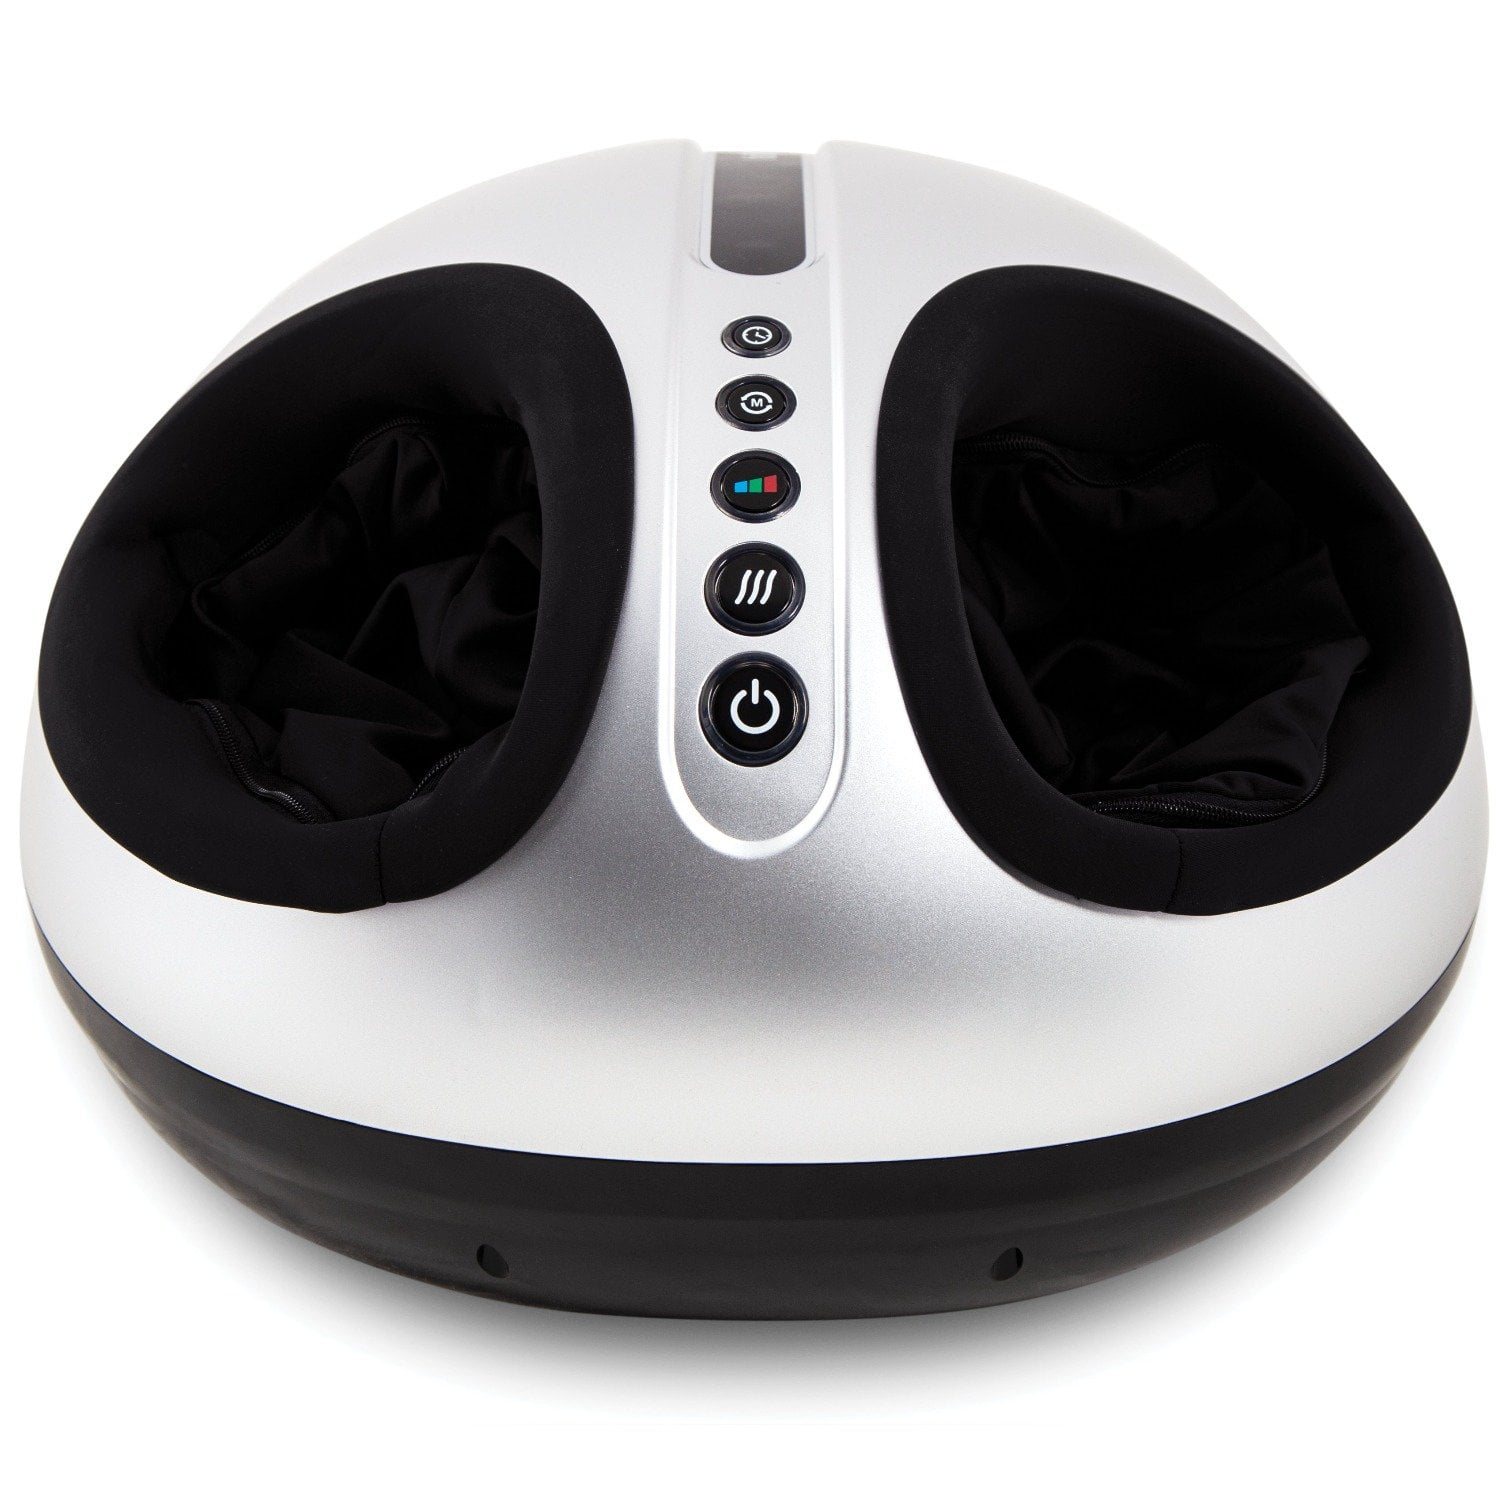 Trumedic Foot Massager With Heat Is 4000i